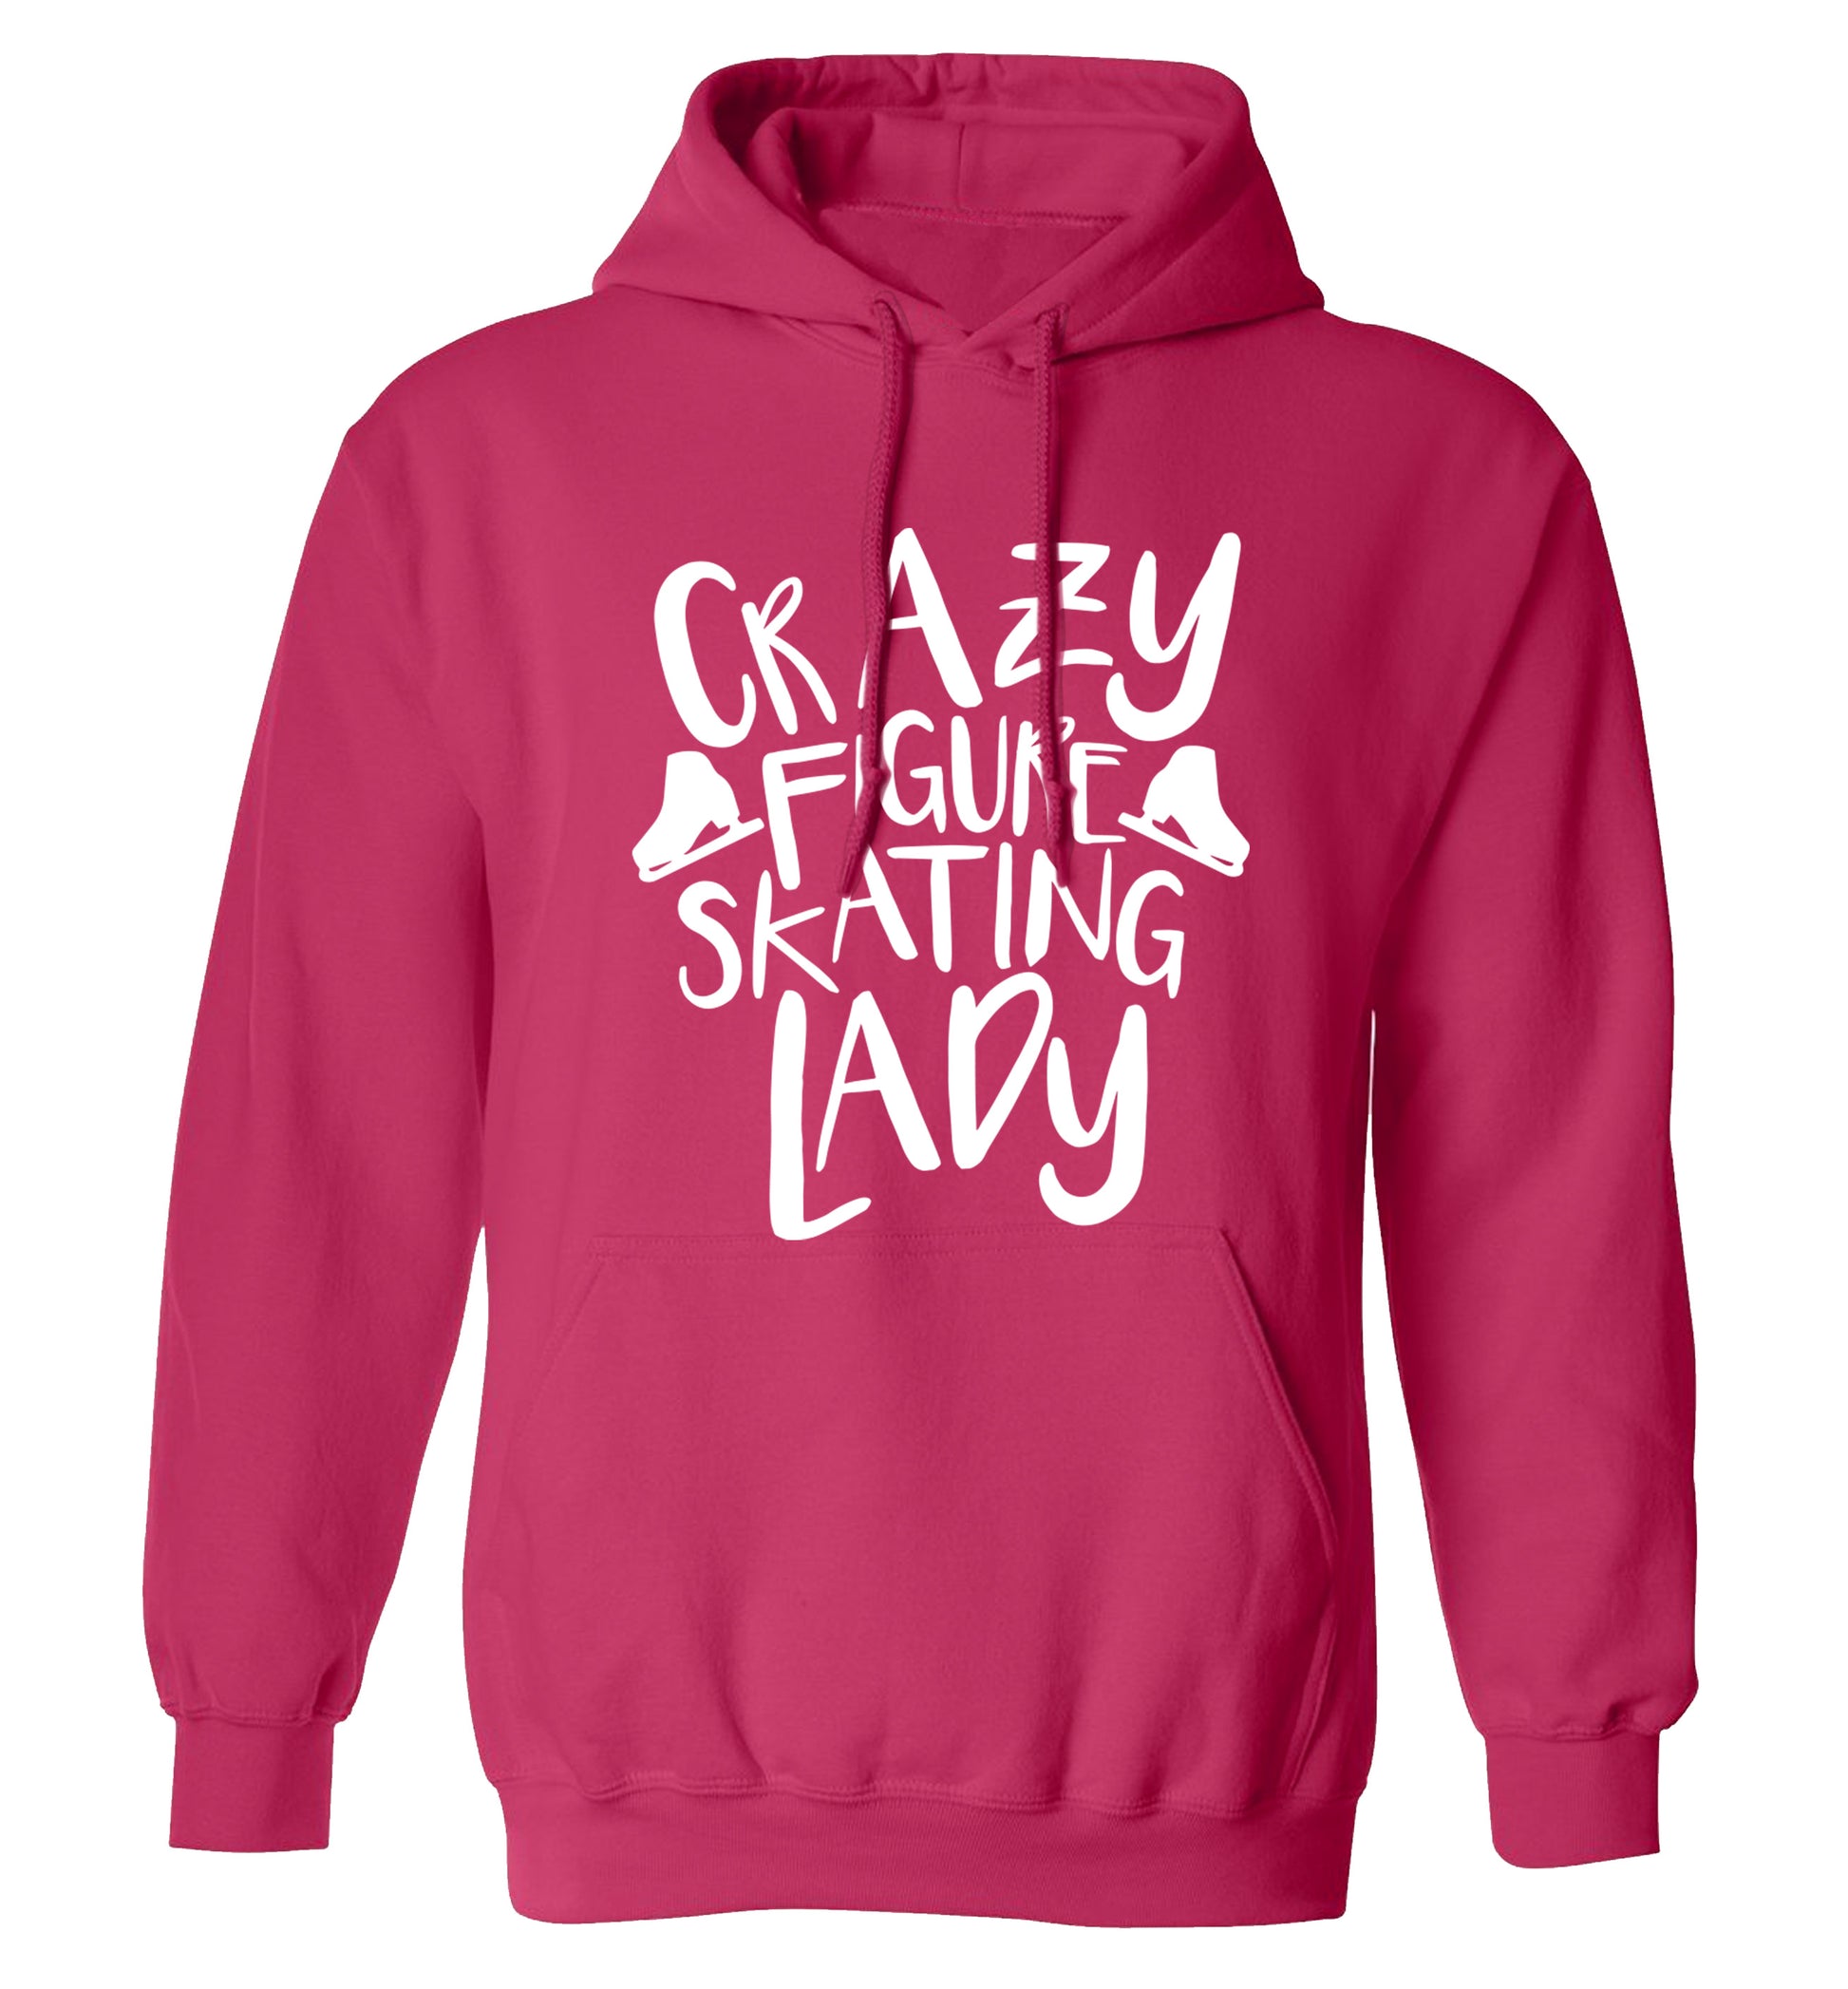 Crazy figure skating lady adults unisexpink hoodie 2XL